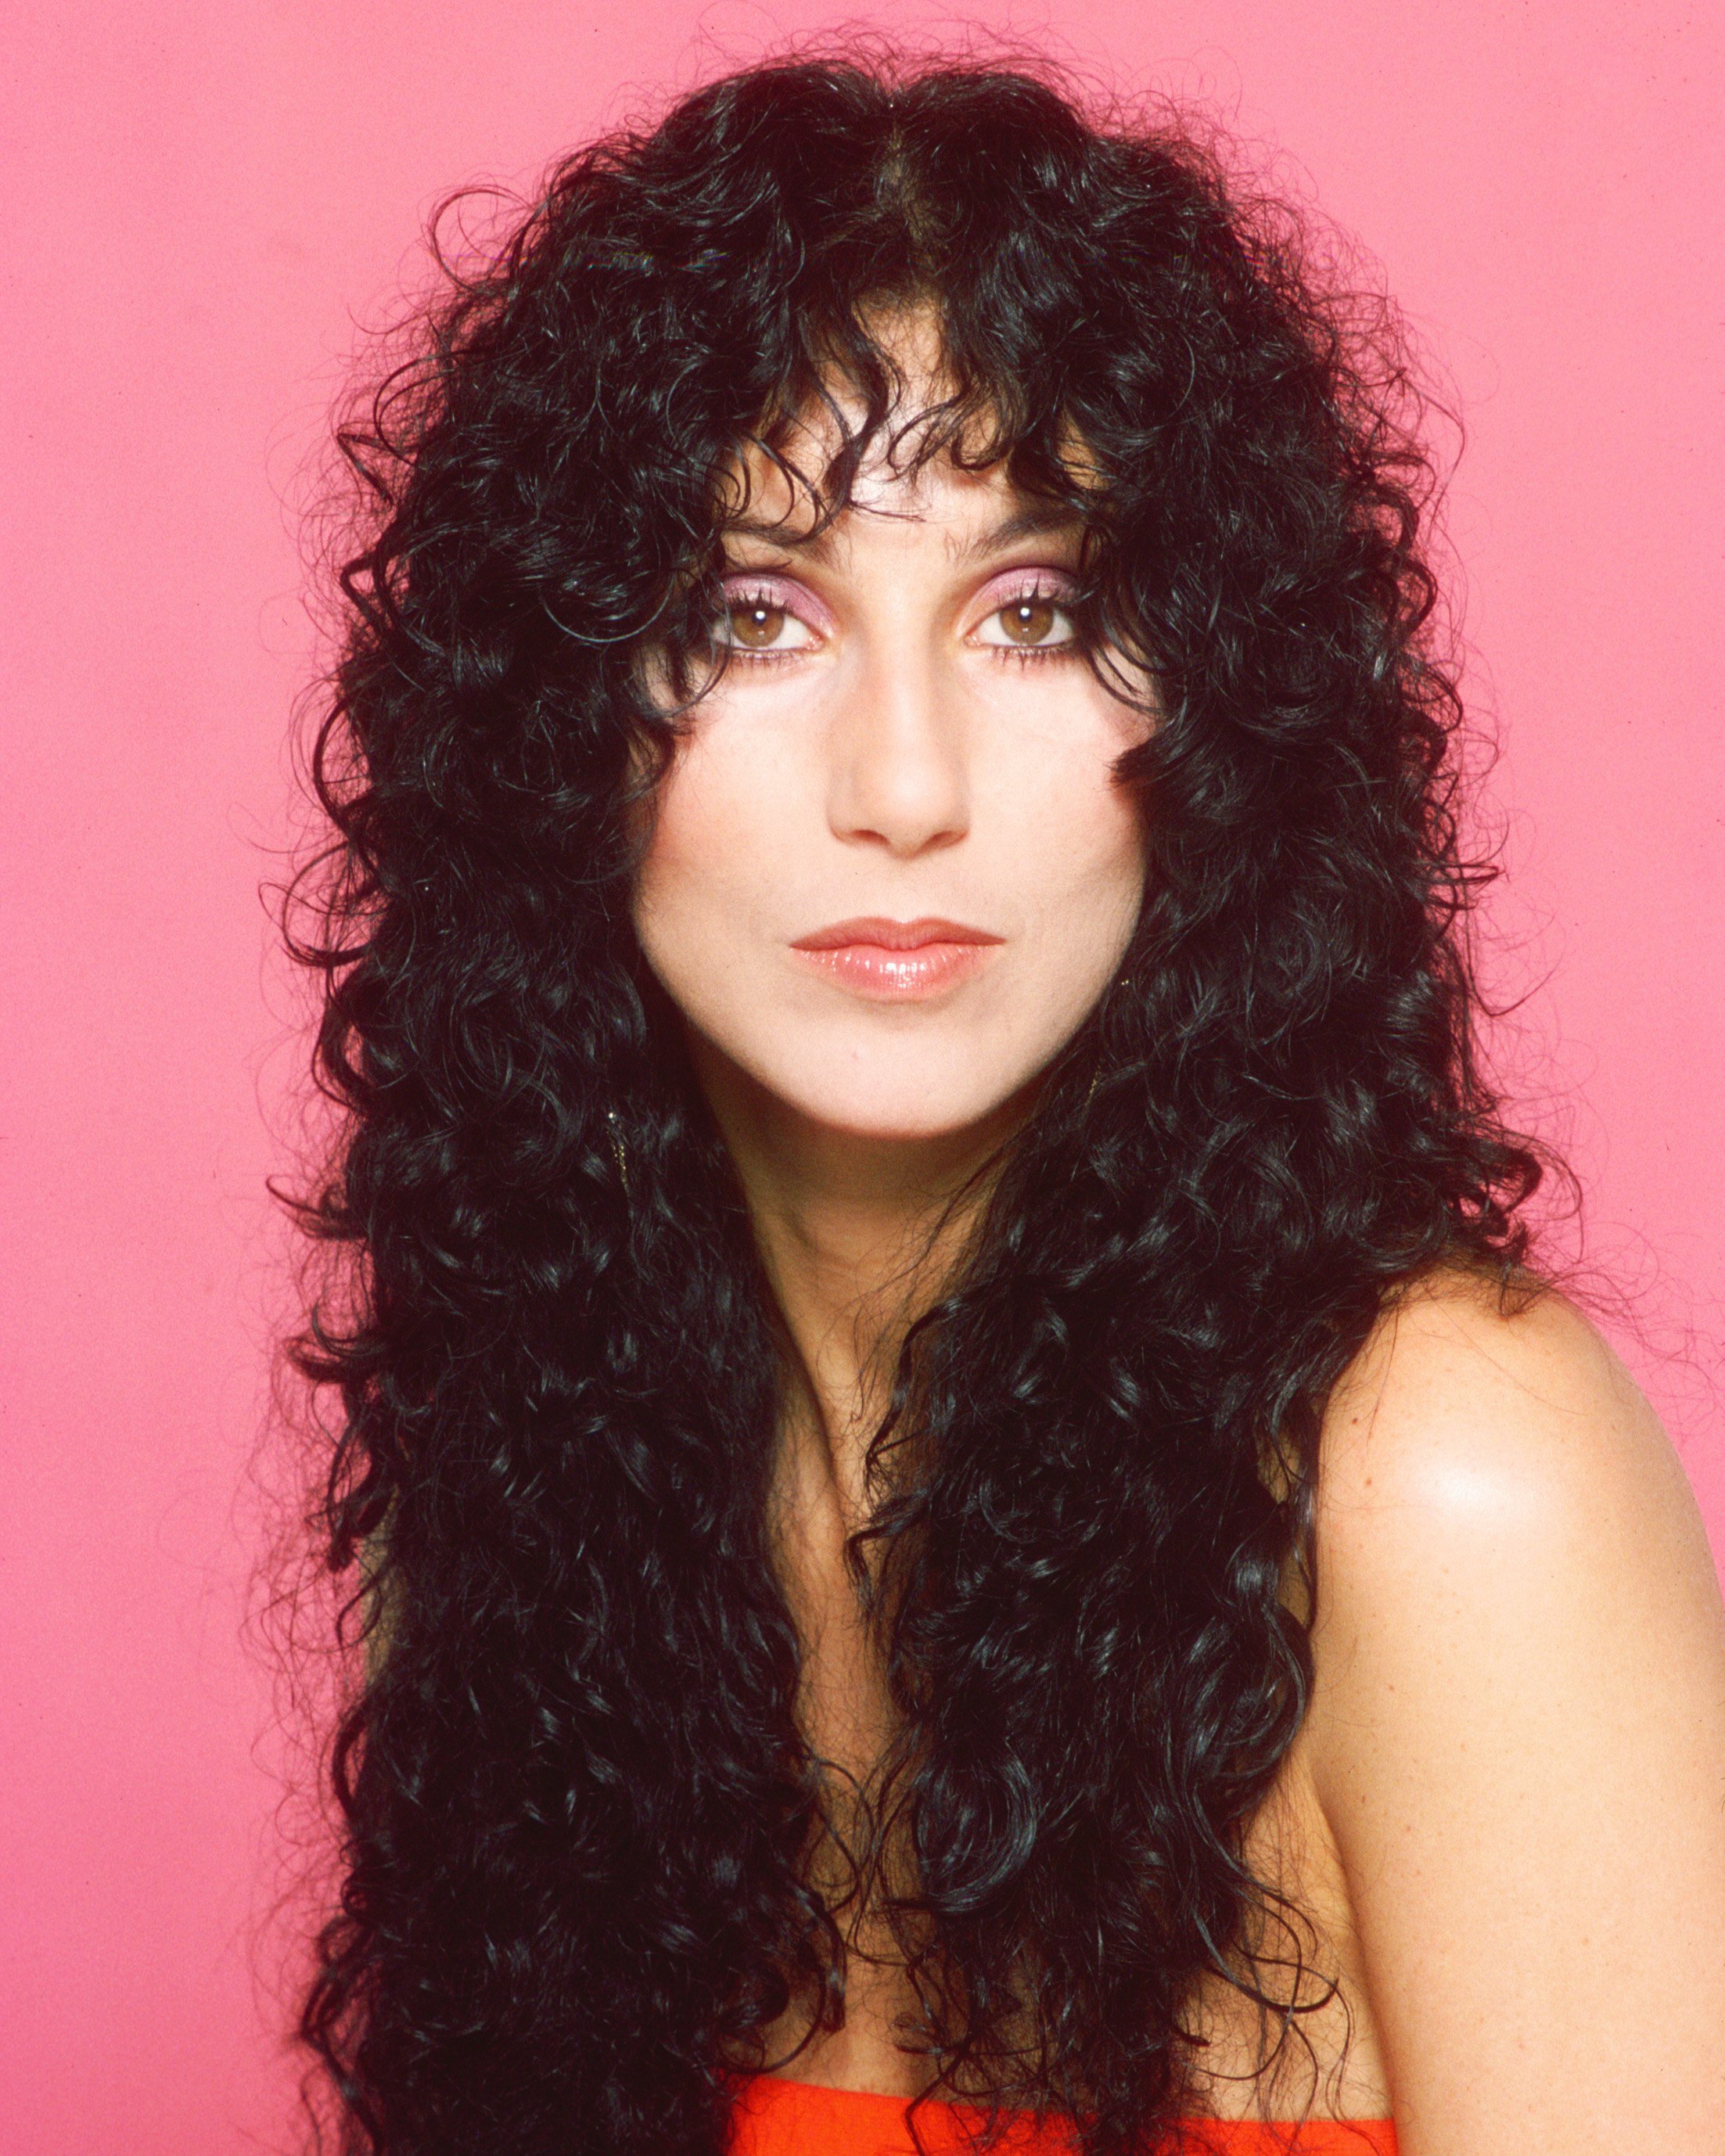 Cher in a publicity shoot in 1979.